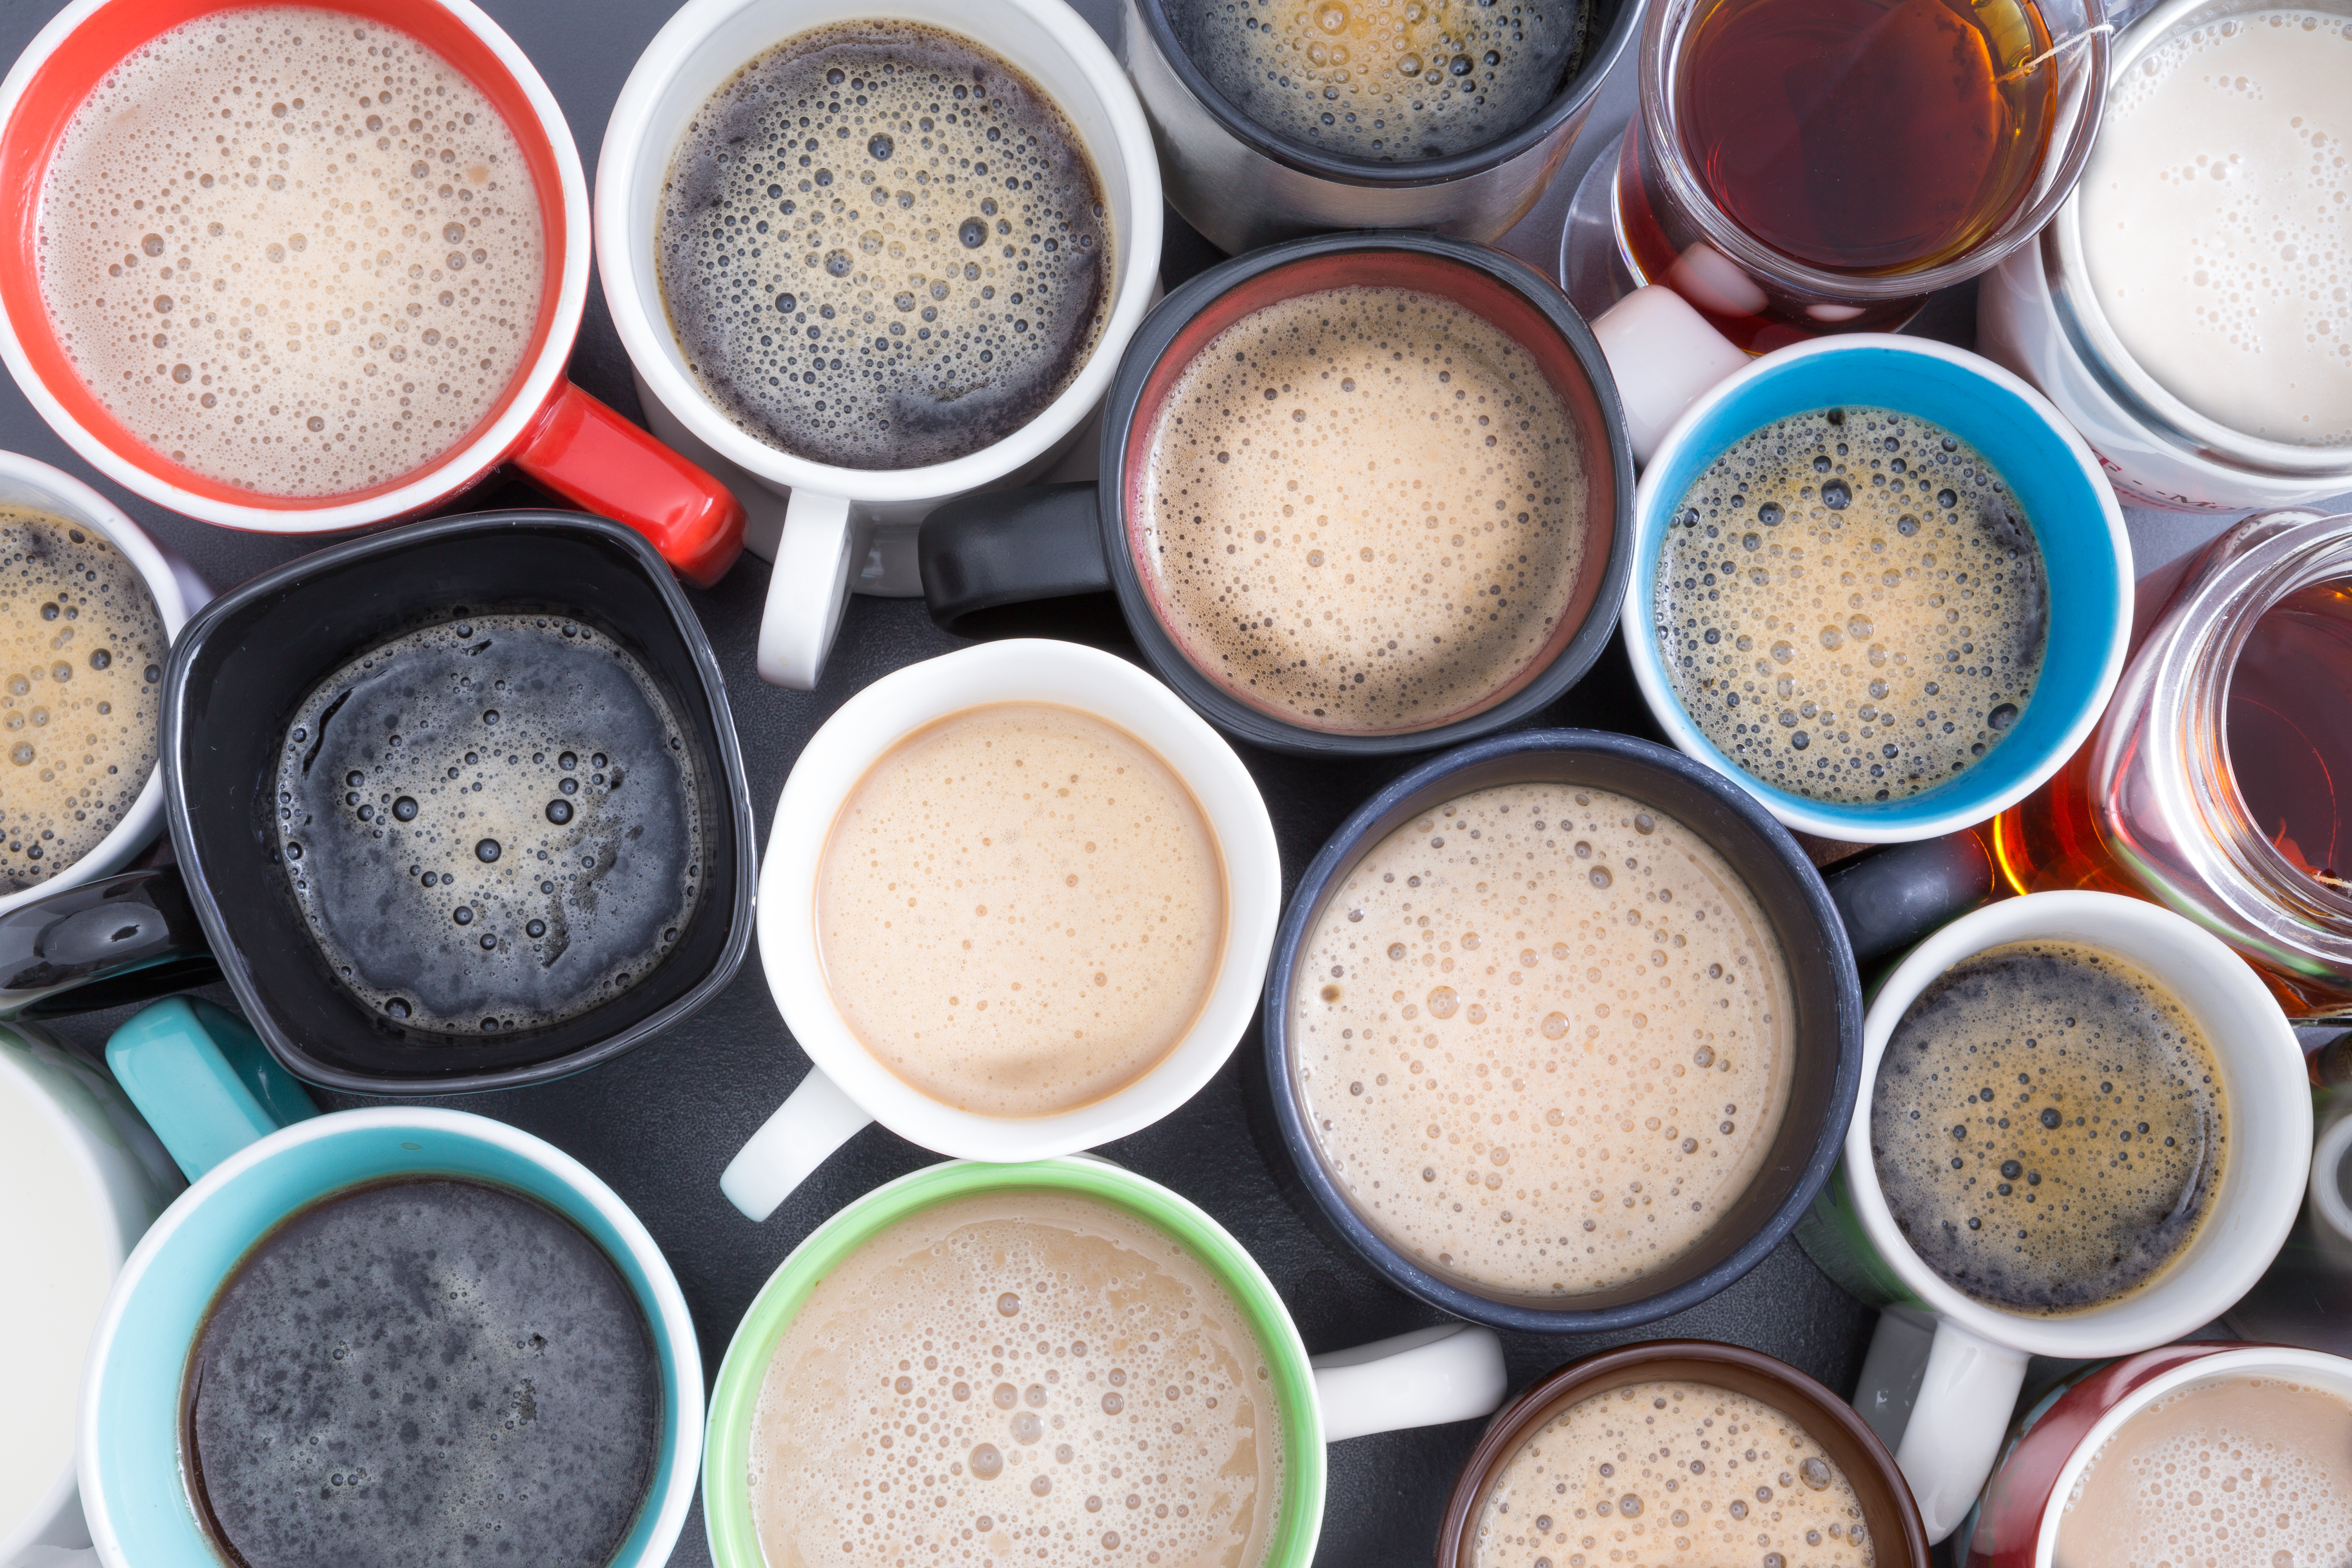 Dozens of cups and mugs filled with coffee, as seen from above.